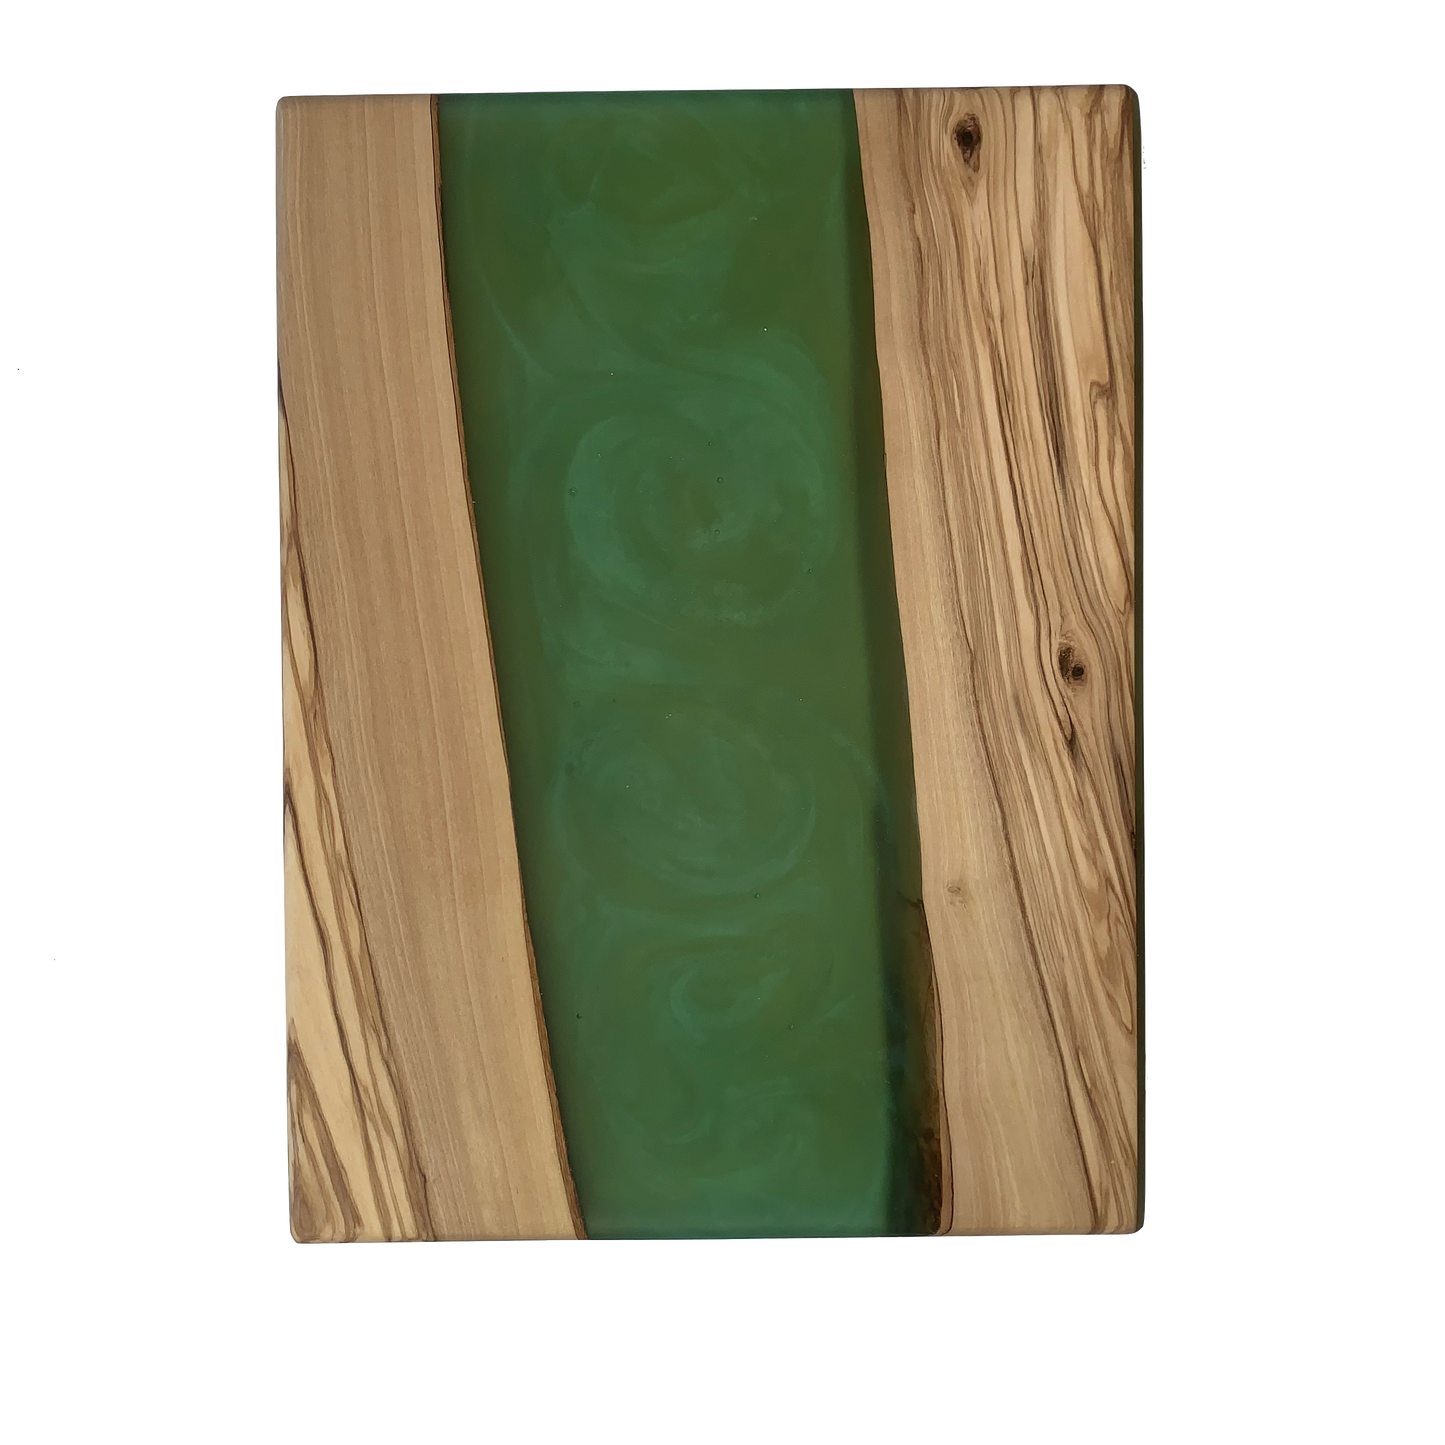 Olive Wood and Green Resin Serving Board